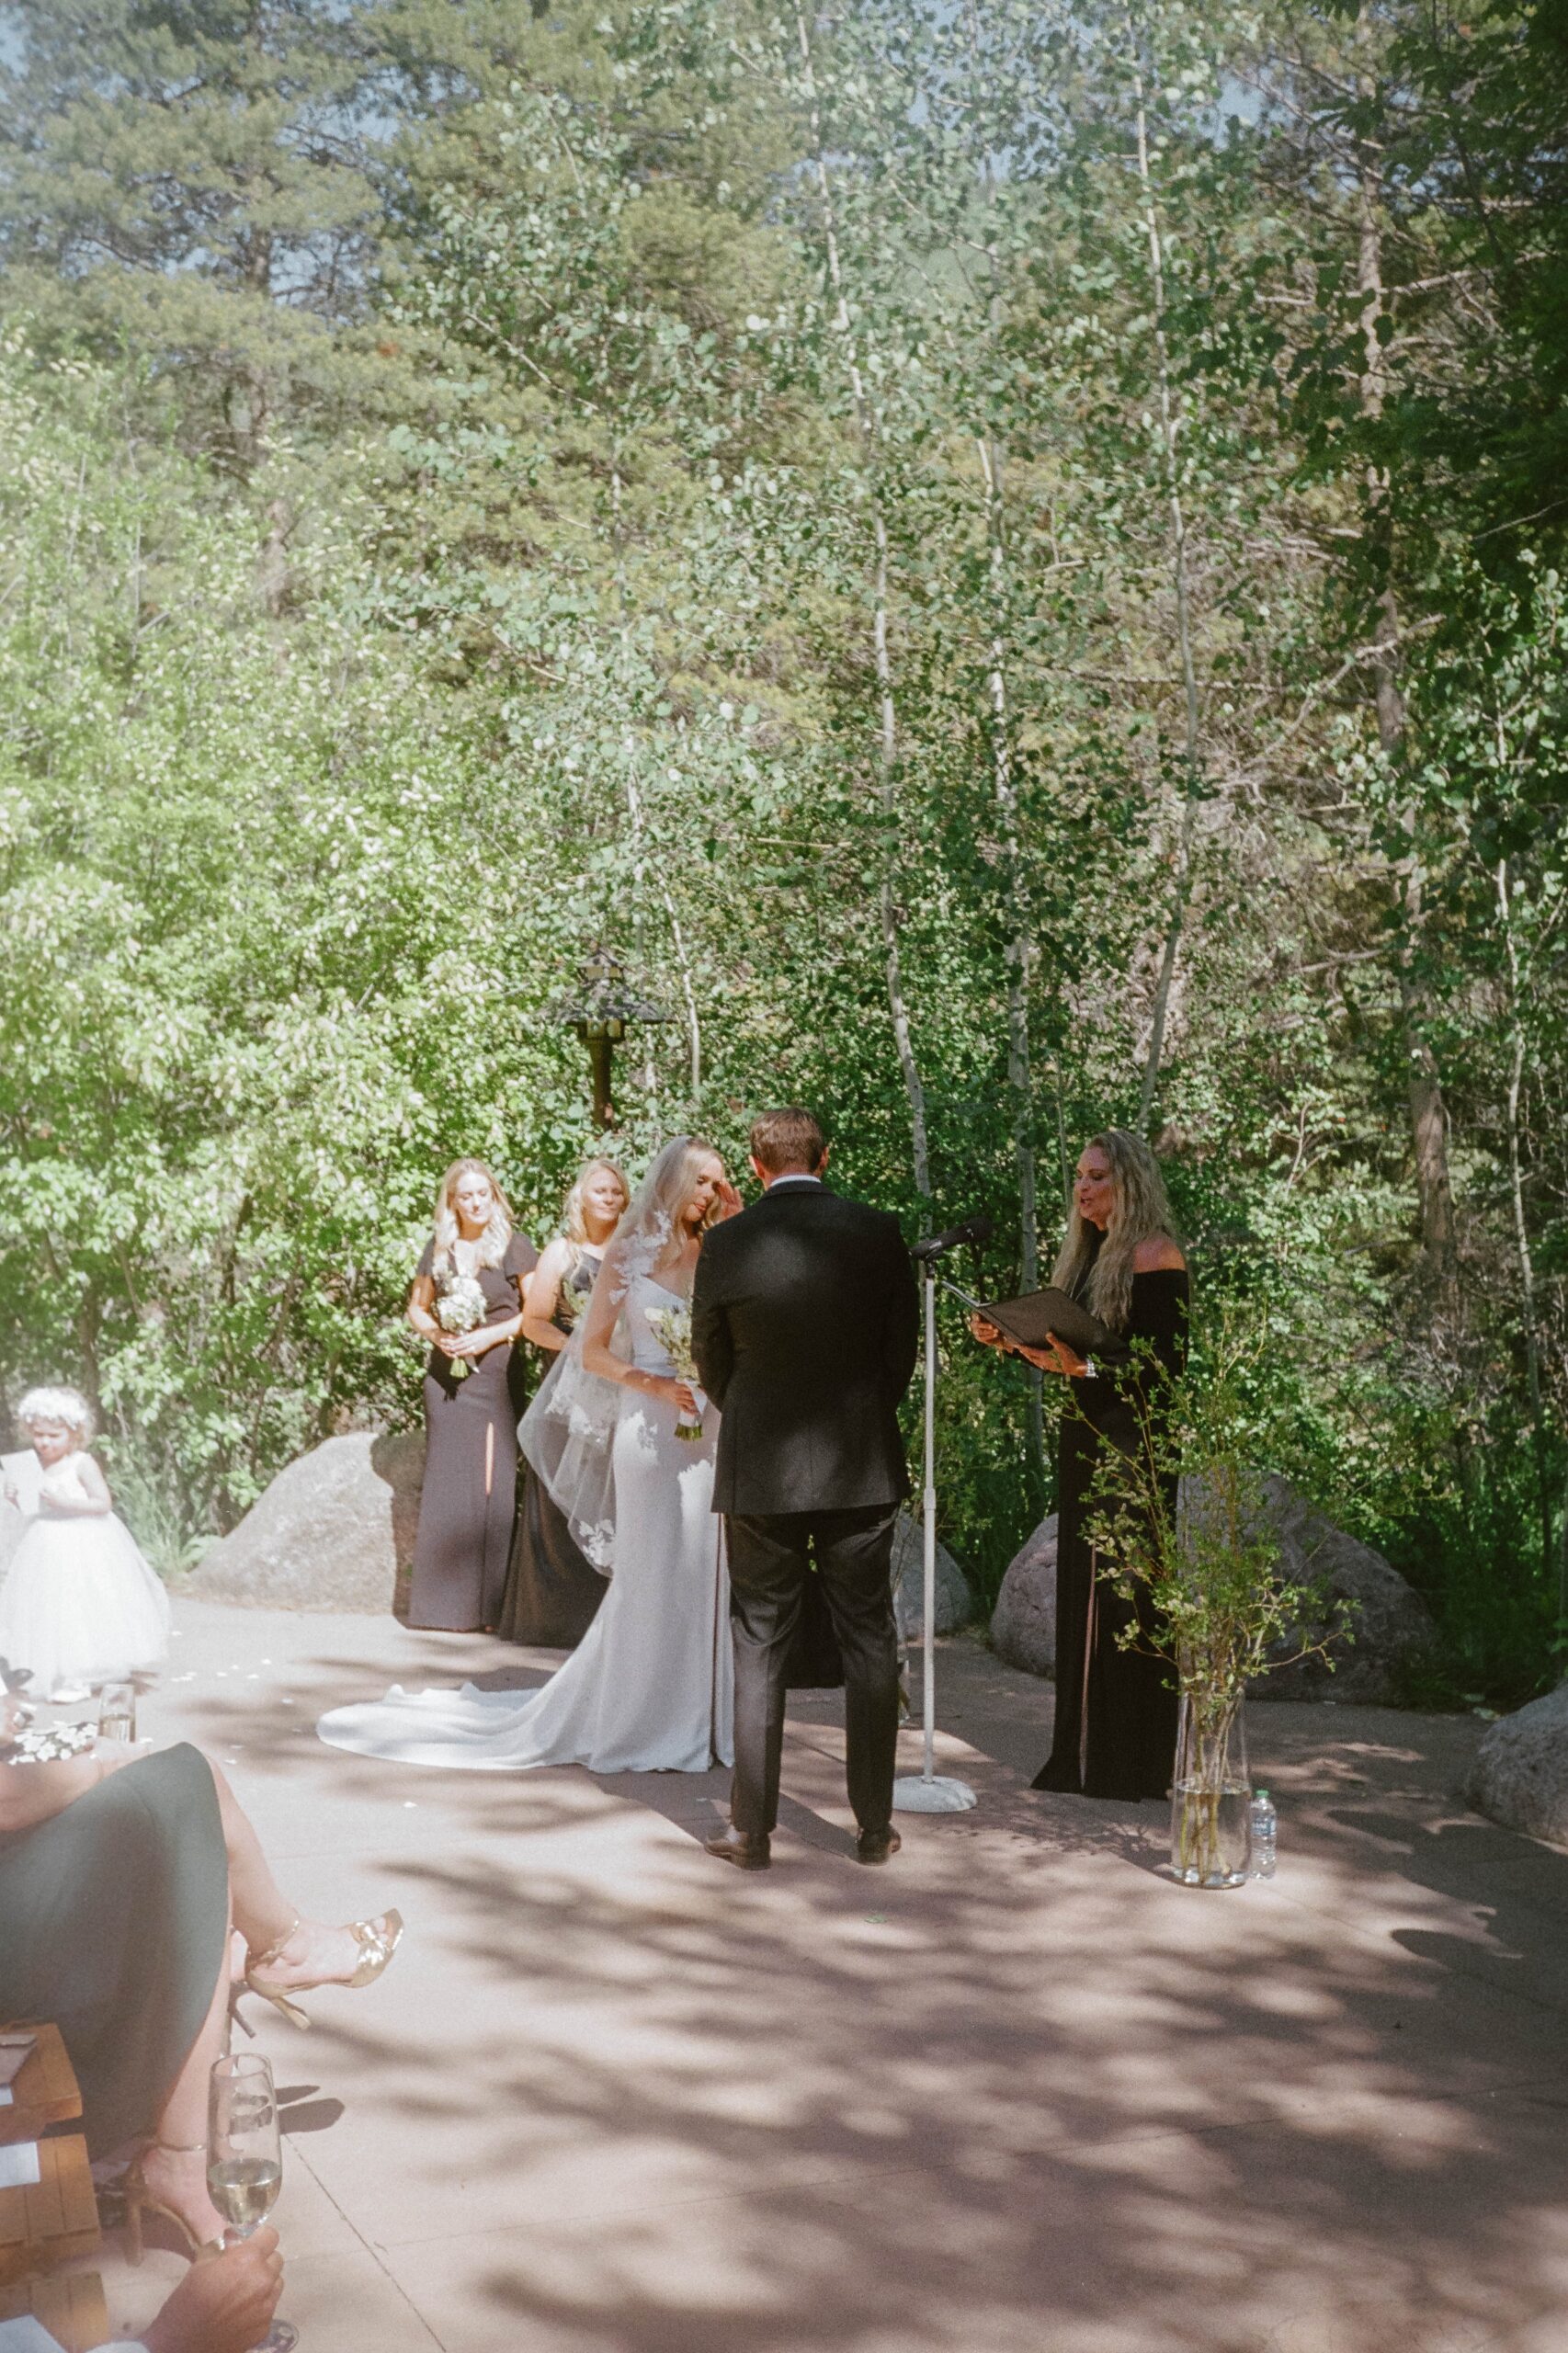 35mm film wedding photography provided by Colorado wedding photographer, Ashley Joyce Photography. 35mm film photos from a dreamy wedding at Donovan Pavilion in Vail, Colorado. 